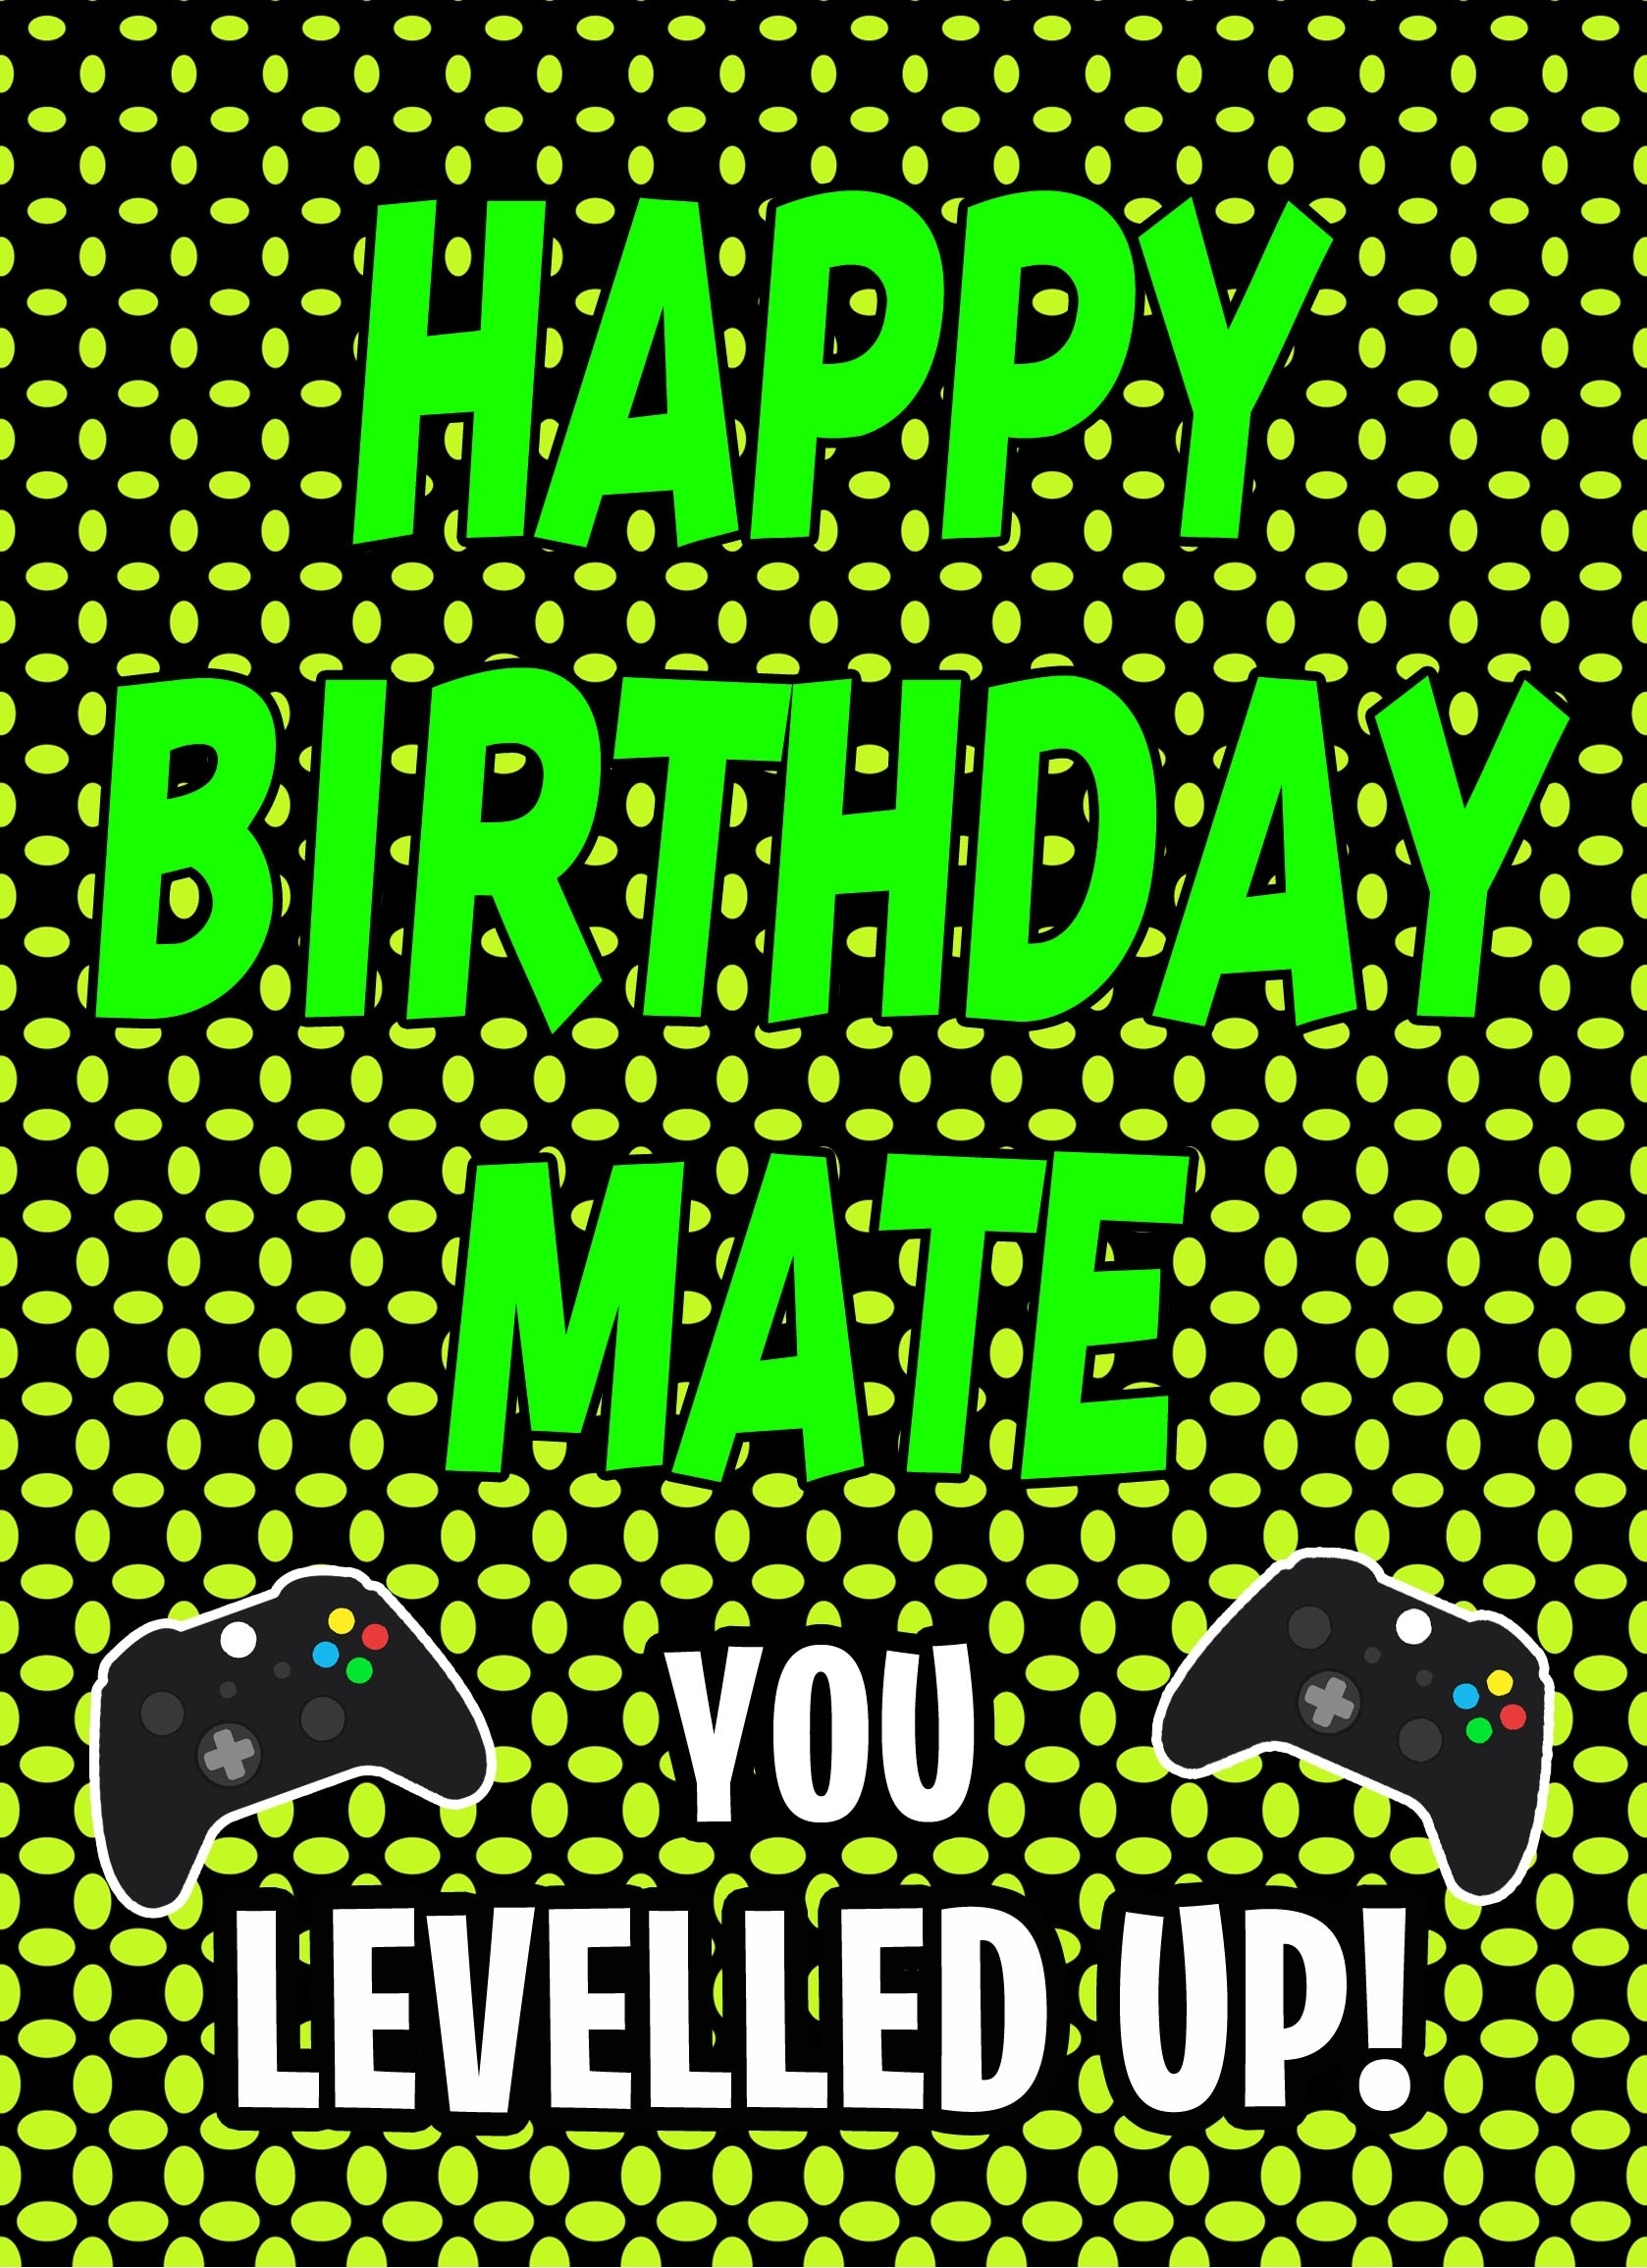 Gamer Birthday Card For Mate (Levelled Up)